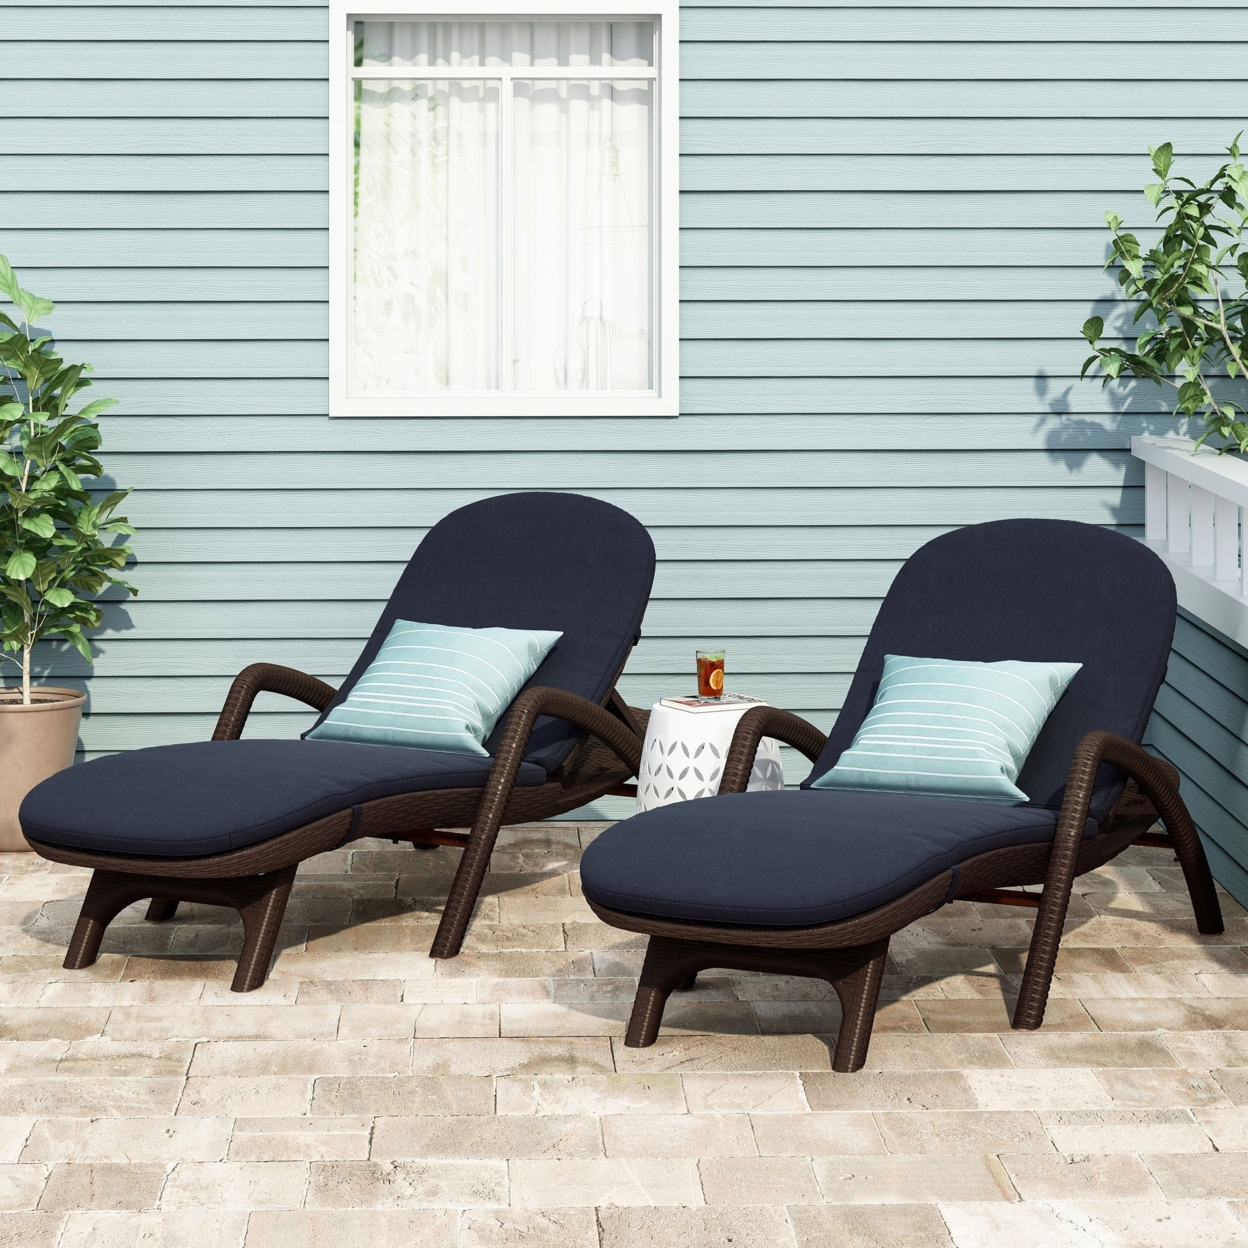 Riley Outdoor Faux Wicker Chaise Lounges With Cushion (Set Of 2) - Dark Brown/blue